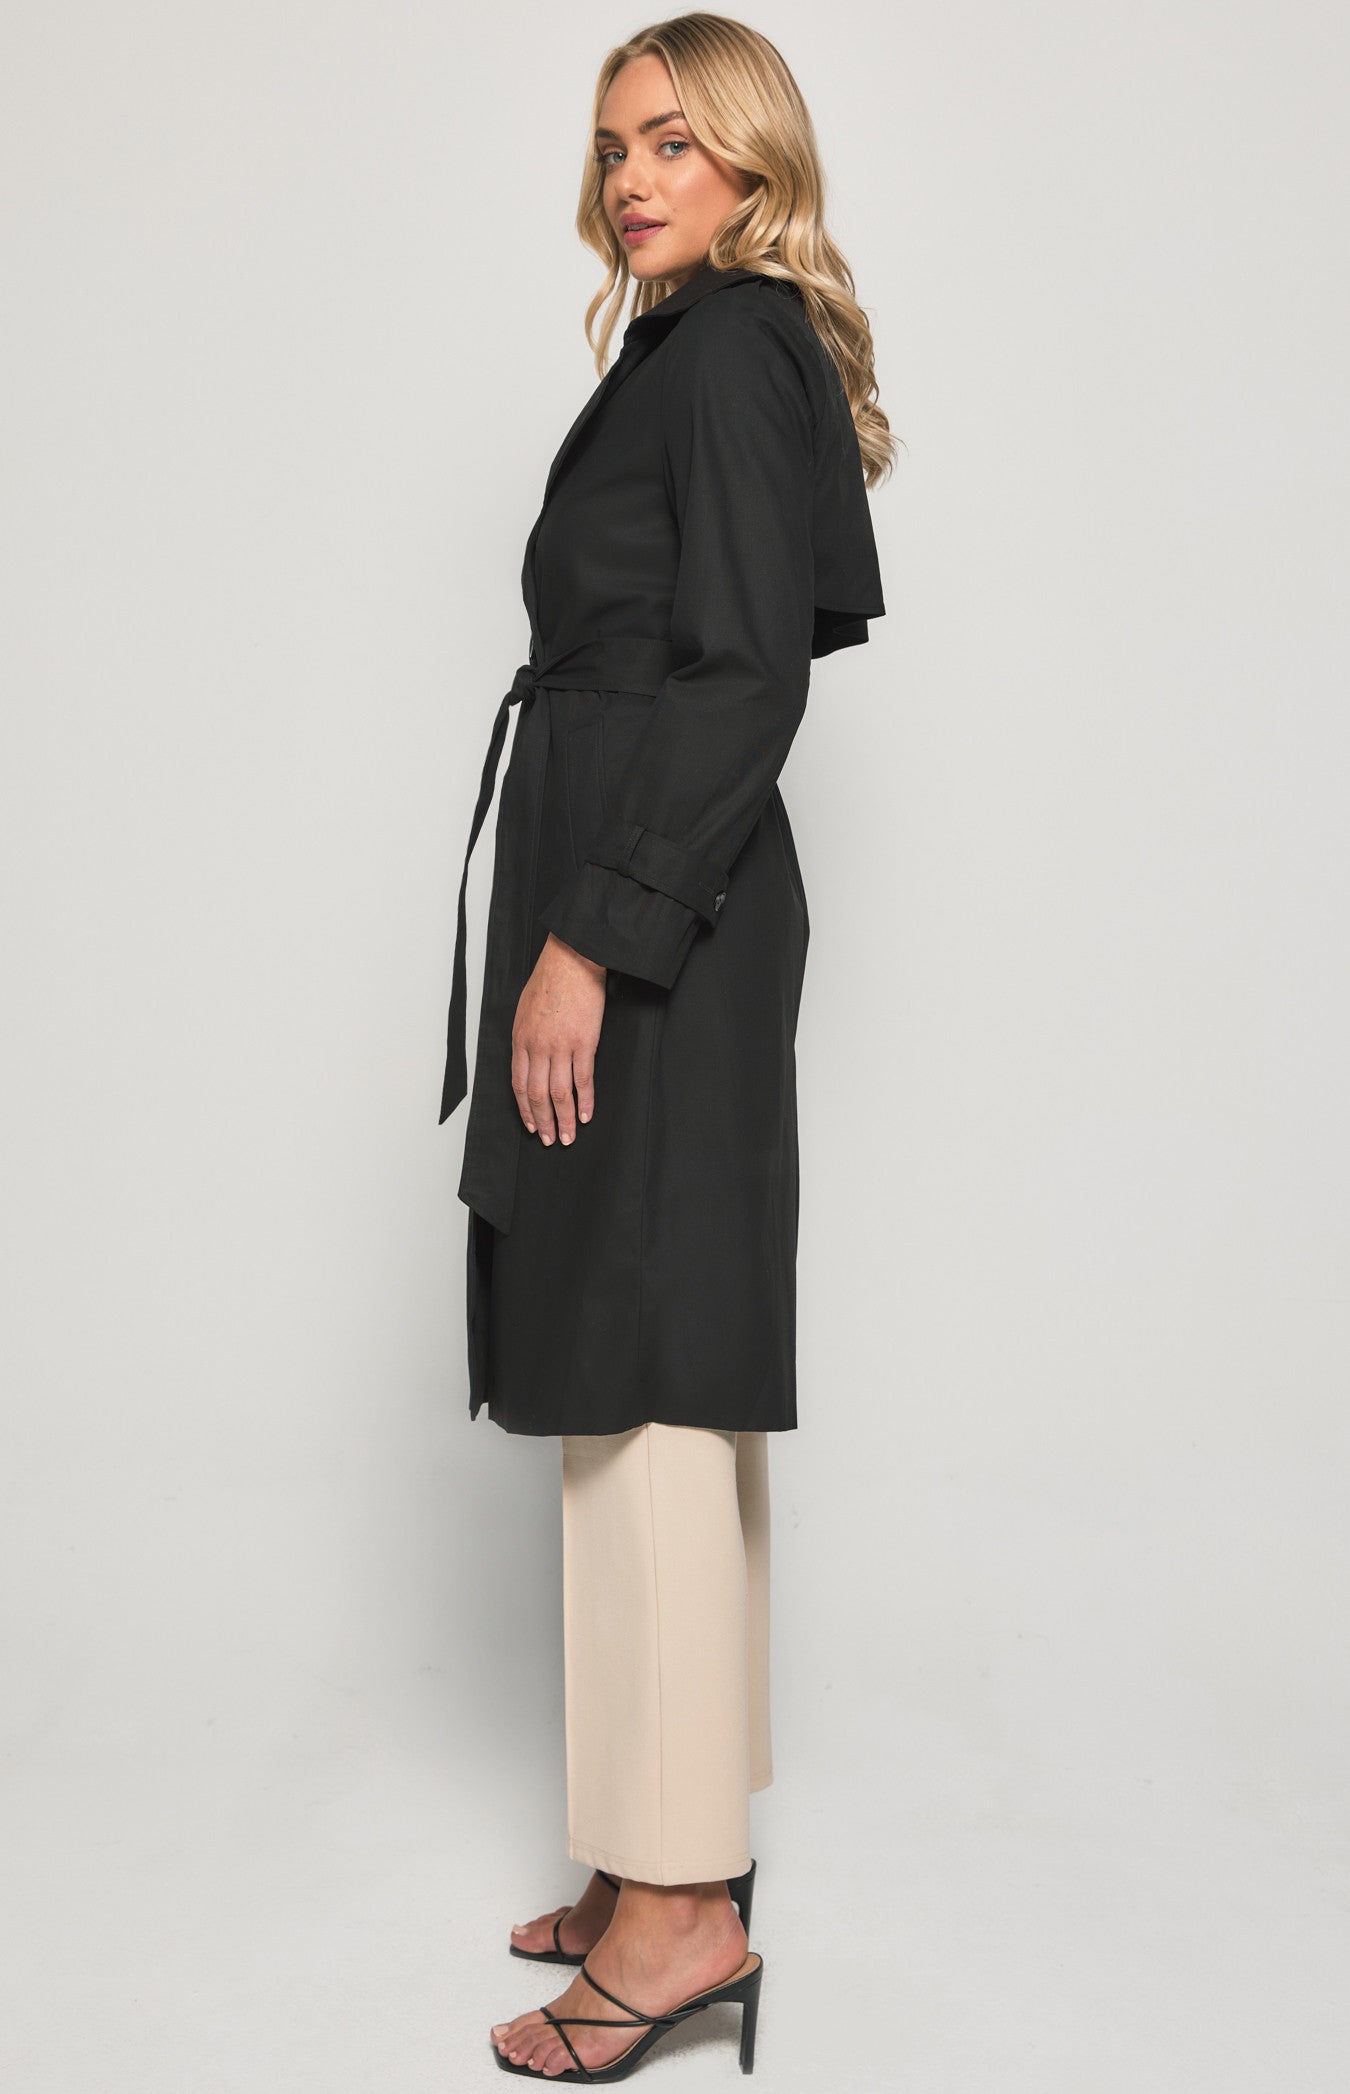 Transform your look with our chic black trench coat. Stylish, durable, and perfect for all seasons. Grab yours today and make a statement. Shop now!